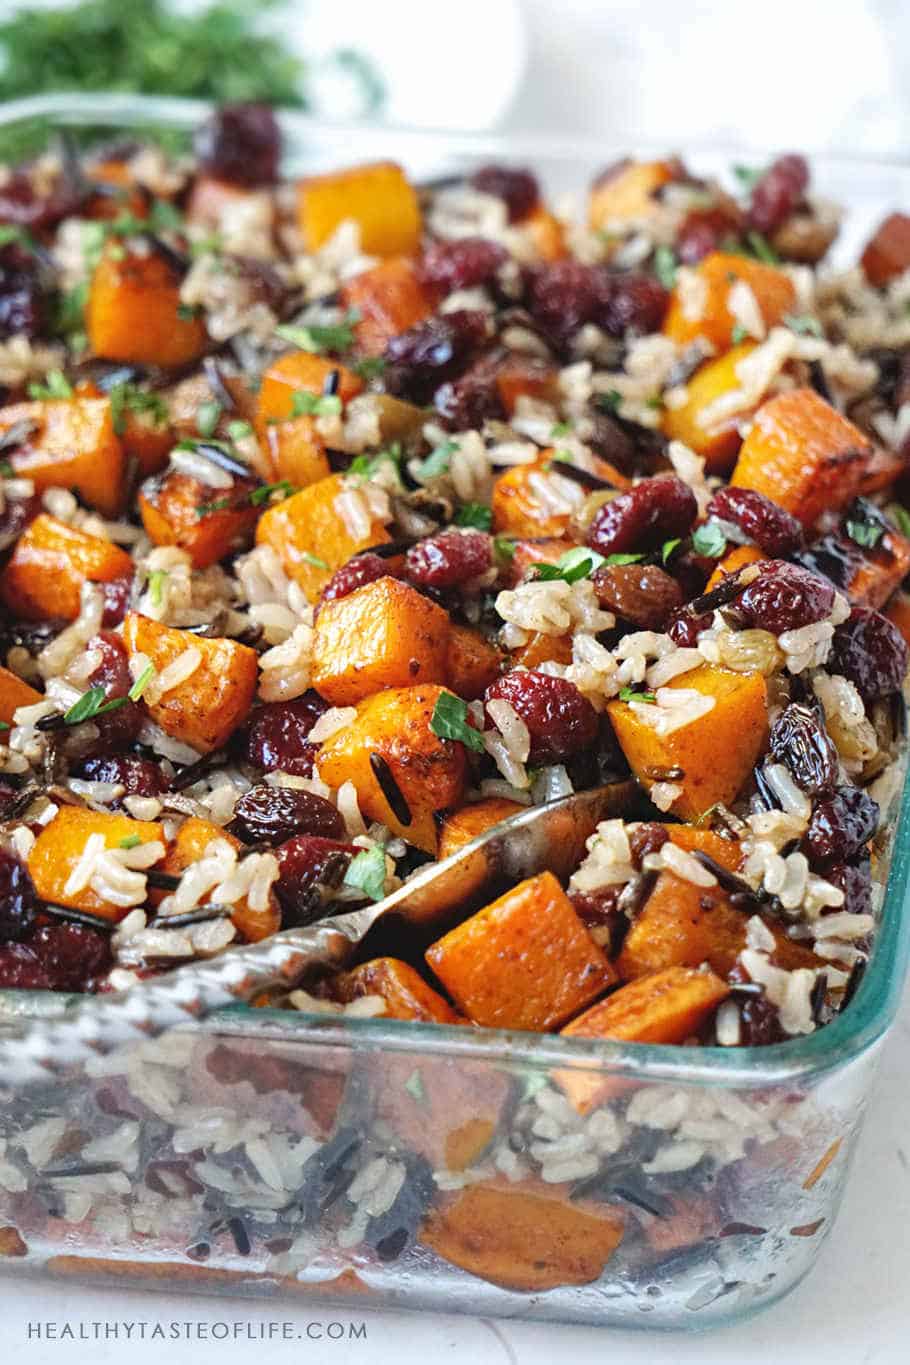 Butternut squash casserole recipe (healthy, vegan side dish) with roasted sweet potatoes, butternut squash, cranberries, complemented by earthiness of brown rice and wild rice and finished with  sweet balsamic notes. It's great as a side dish or as meal during fall or holiday season (Thanksgiving or Christmas) #butternutsquash #butternutsquashcasserole #sweetpotatocasserole #thanksgiving #thanksgivingsidedish   